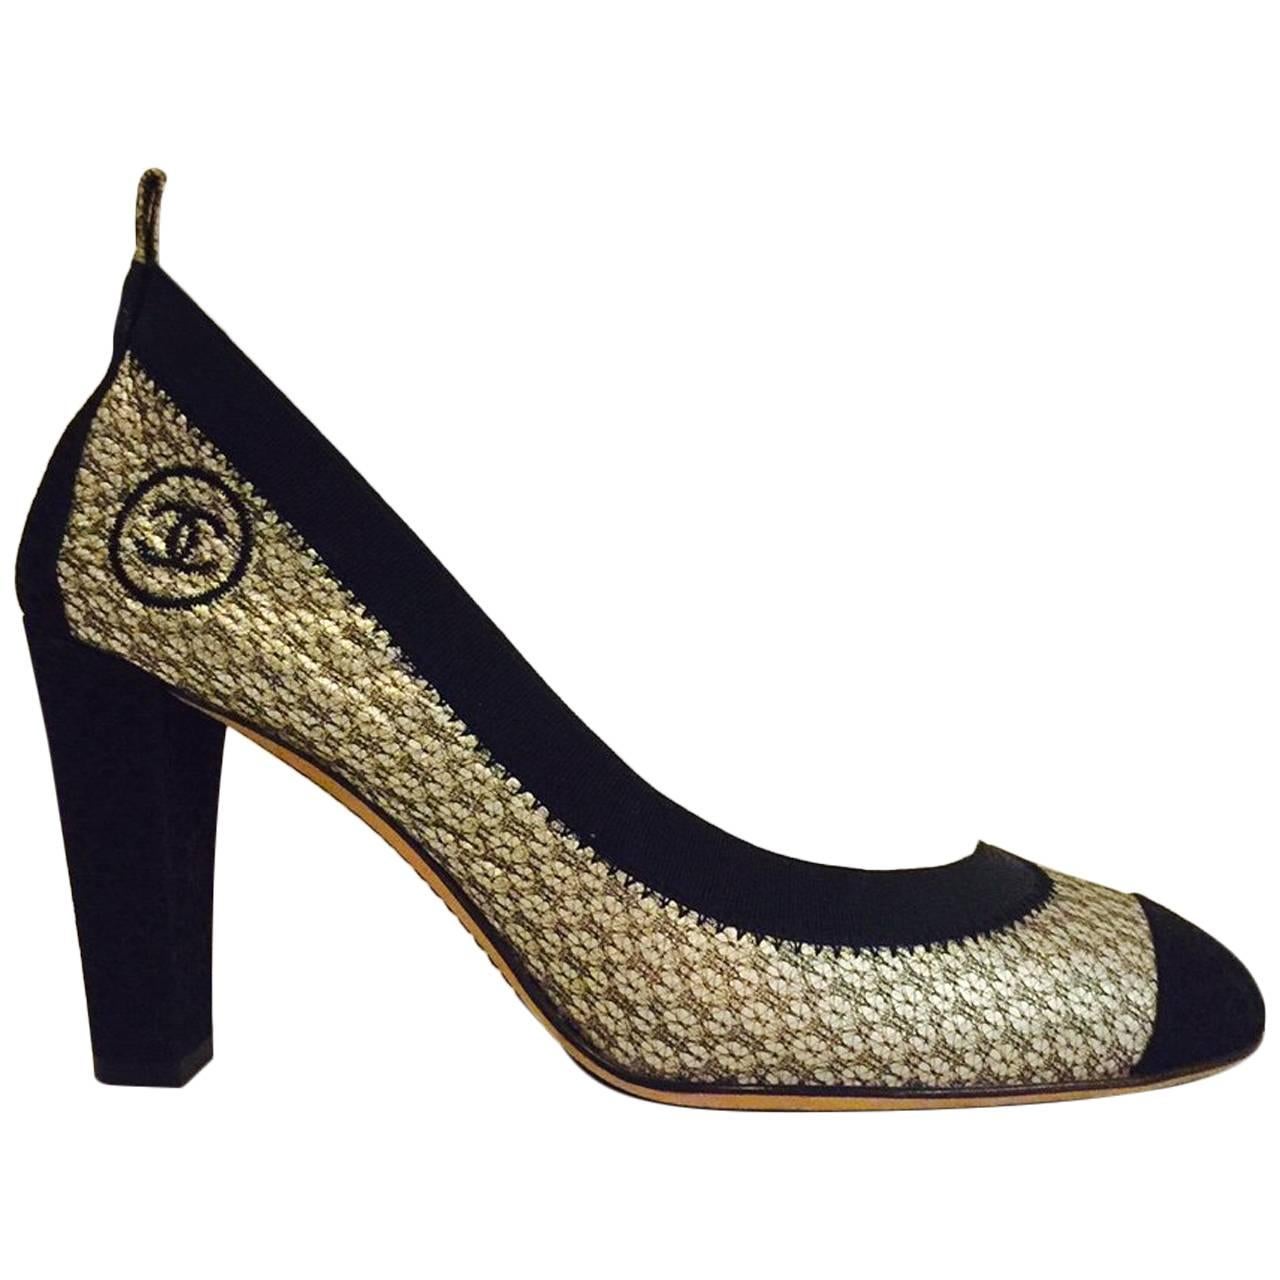 Chanel Antique Gold Metallic Leather and Black Brocade Stretch Pumps 